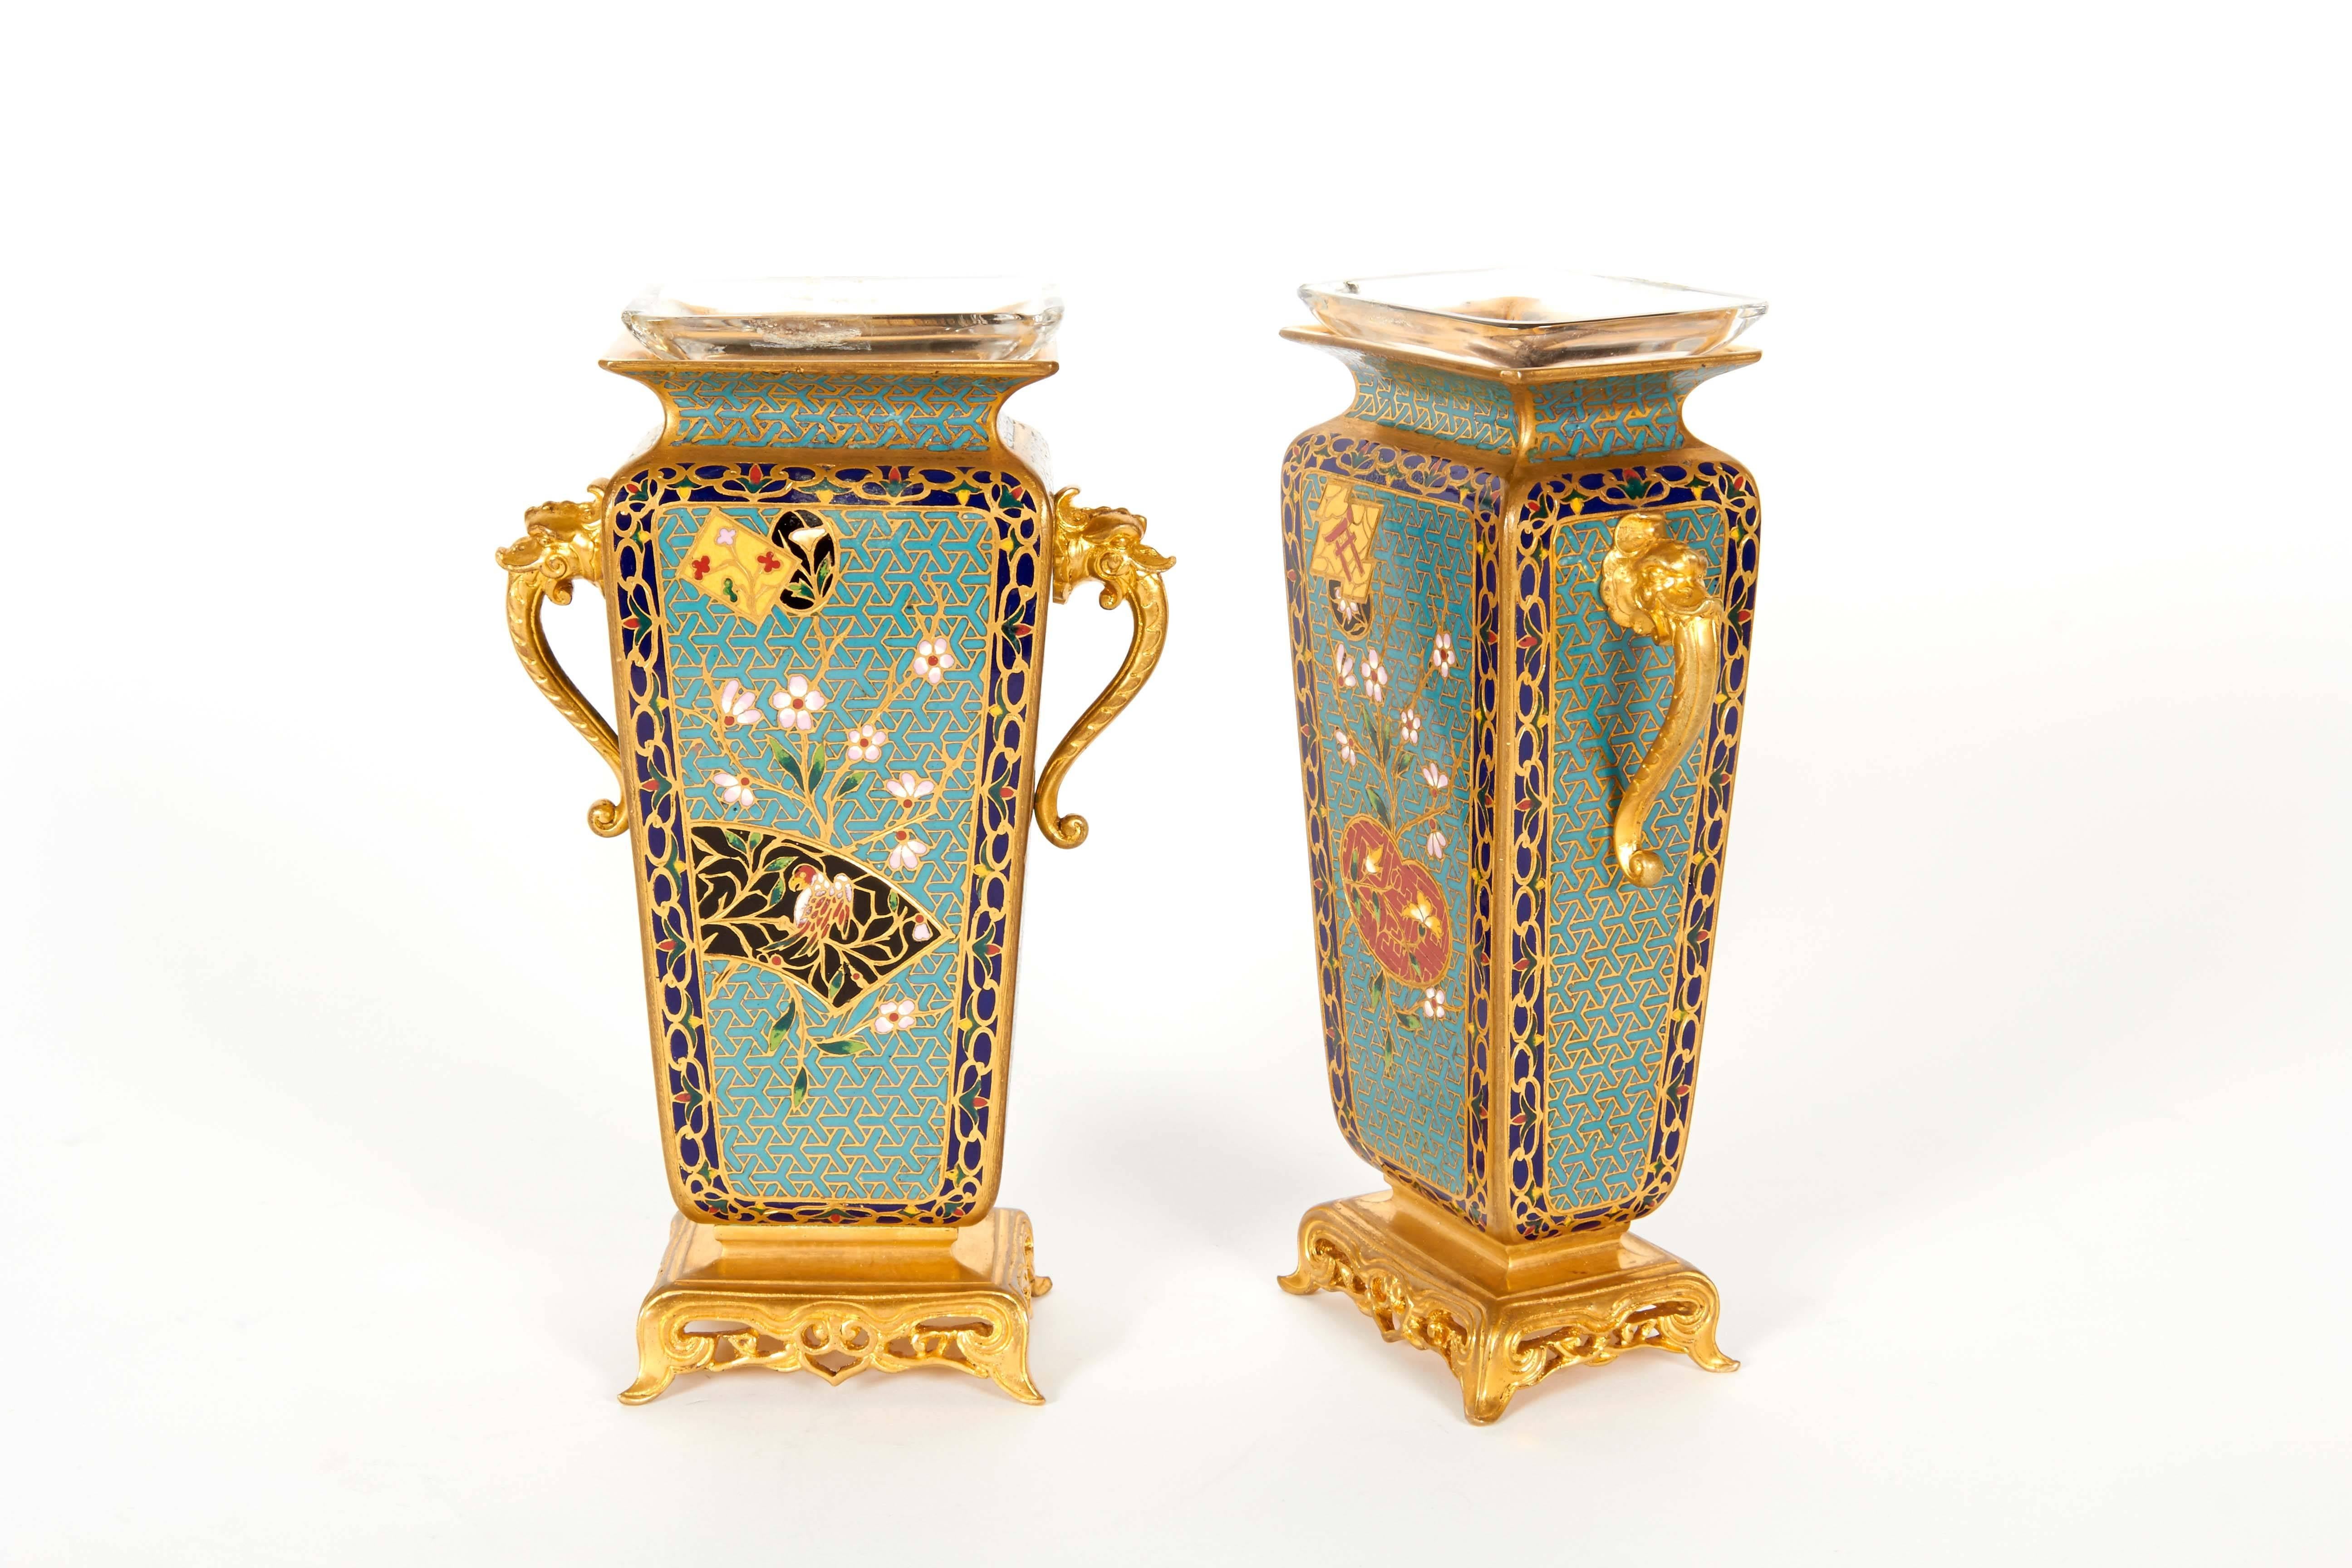 Pair of French Japonisme Ormolu and Champlevé Cloisonné Enamel Vases 3